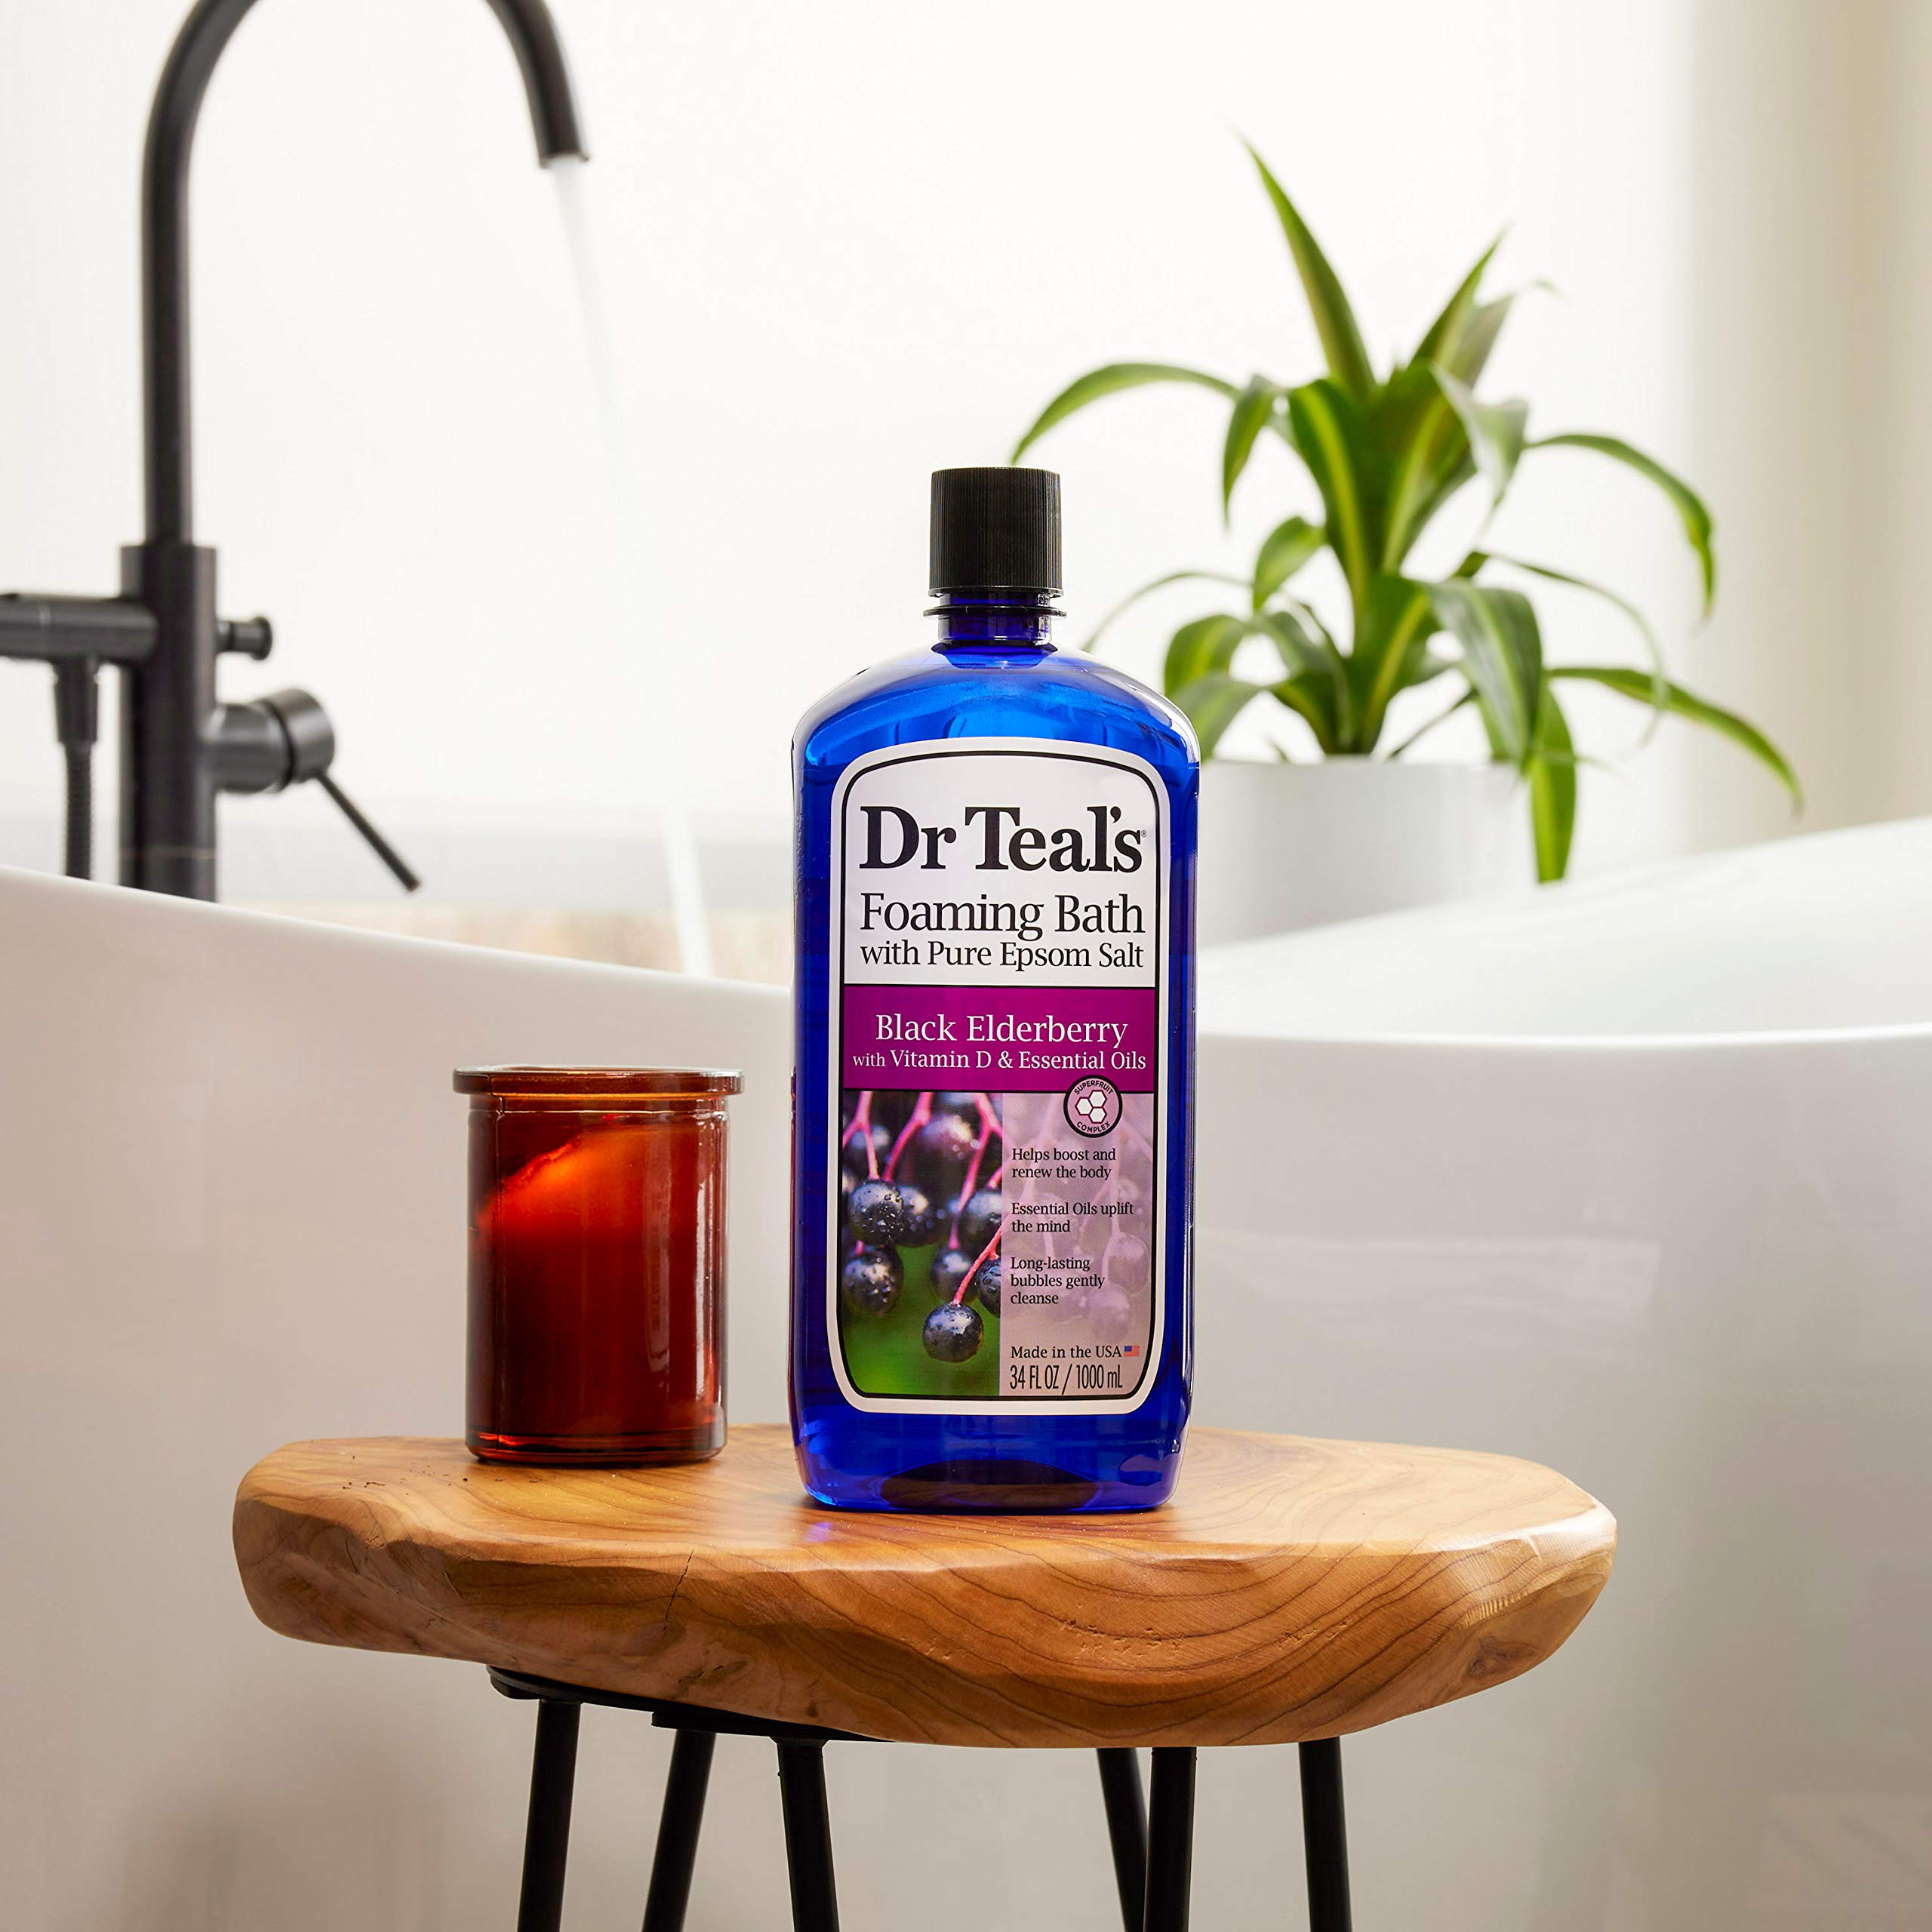 Dr Teal's Foaming Bath with Pure Epsom Salt, Black Elderberry with Vitamin D & Essential Oils, 34 fl oz (Packaging May Vary)